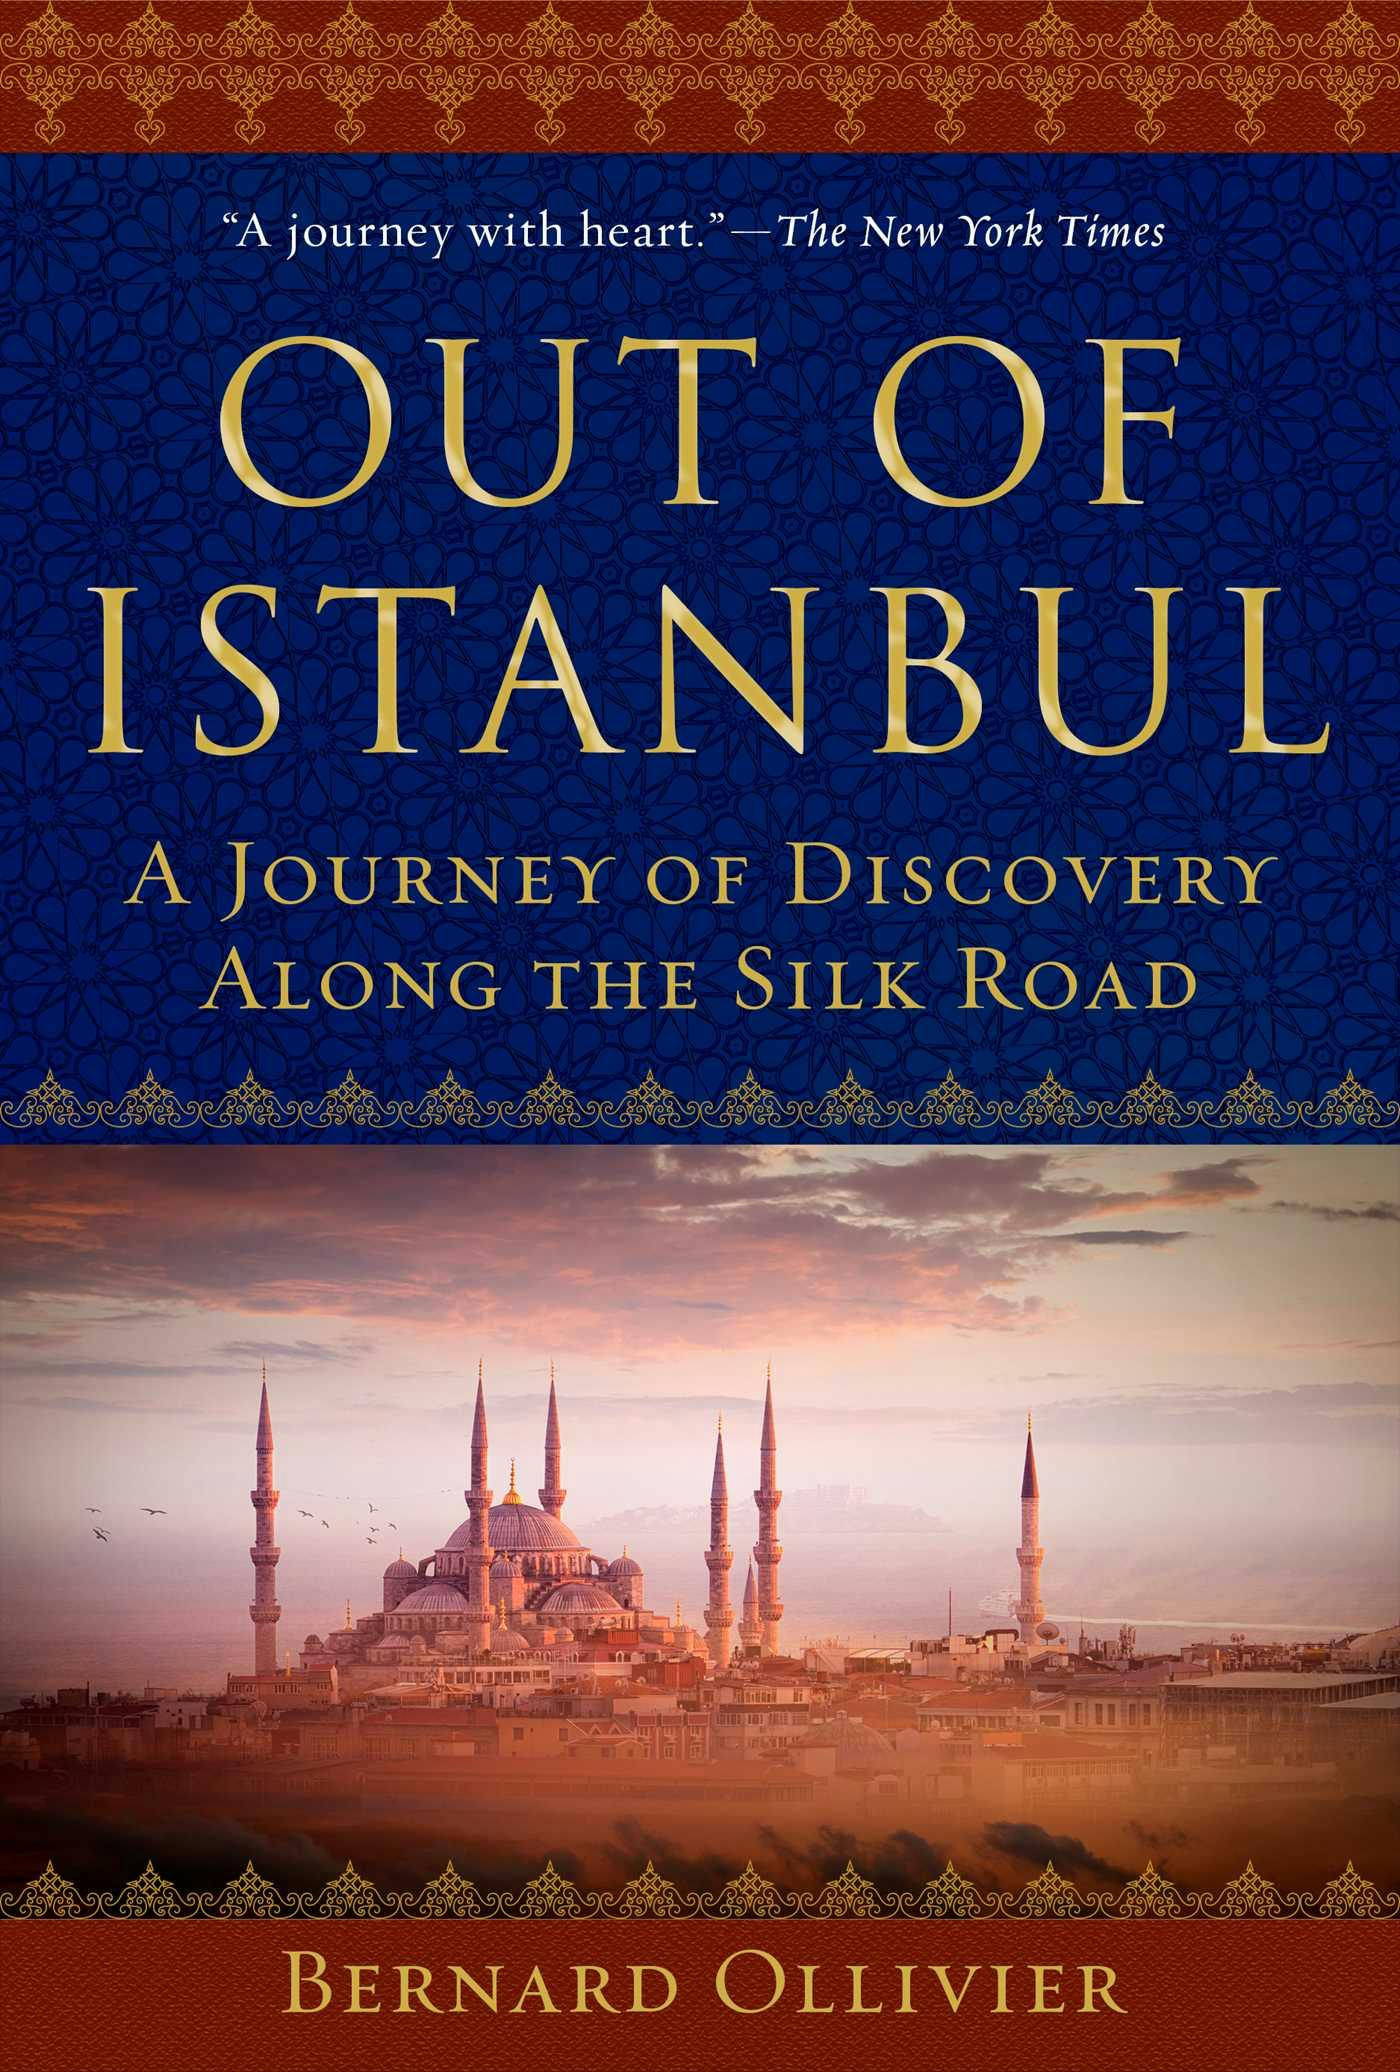 Out of Istanbul: A Journey of Discovery along the Silk Road - Bernard Ollivier